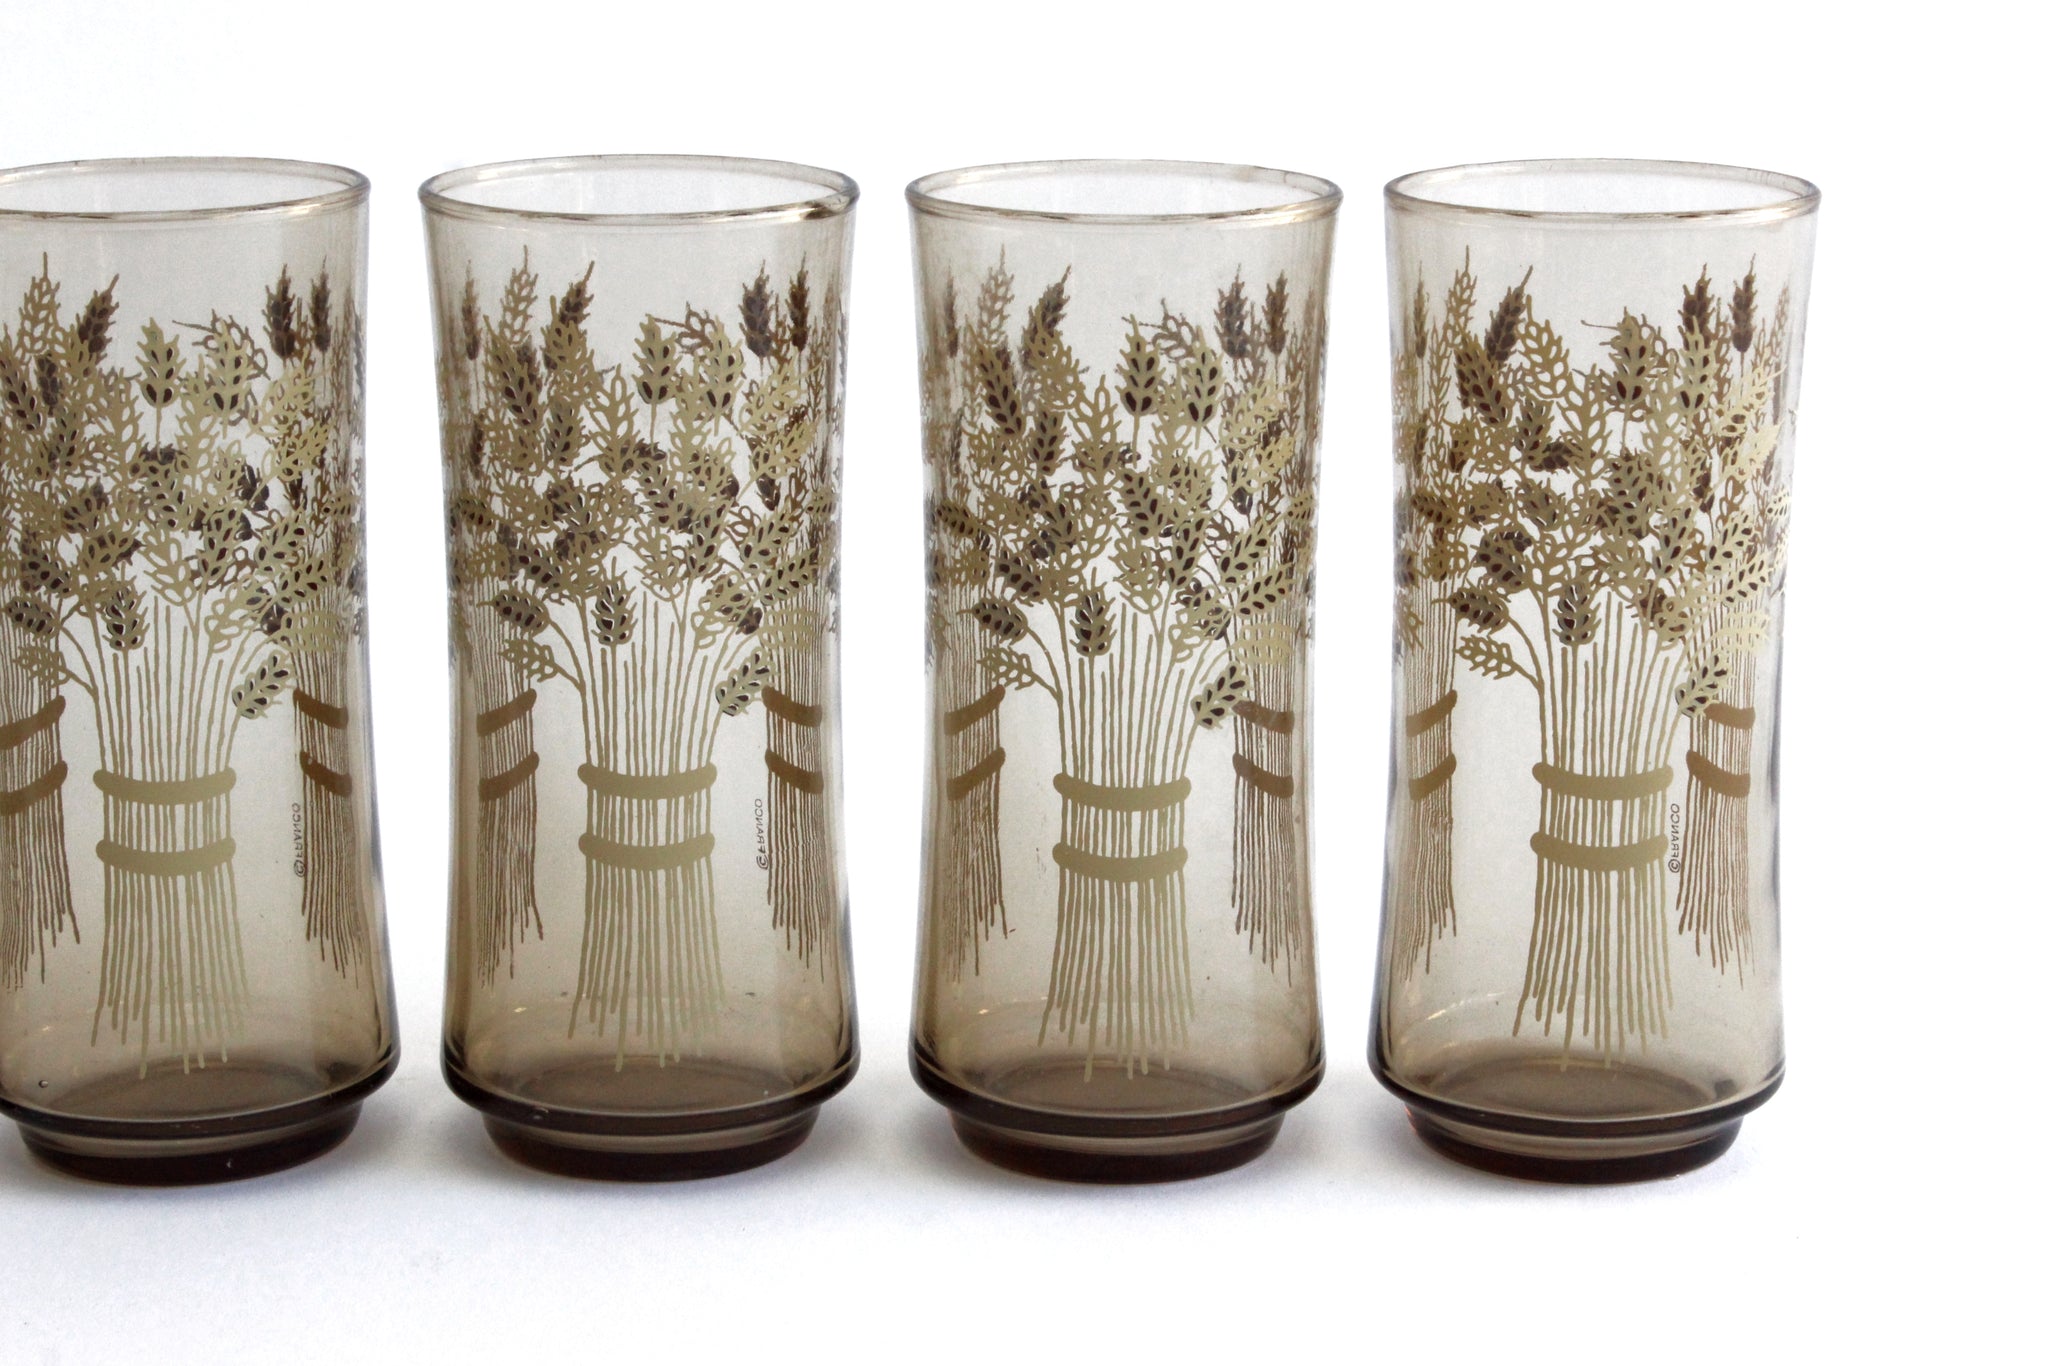 Vintage Water Glasses, 1960's Tall Glass Tumblers With Wheat